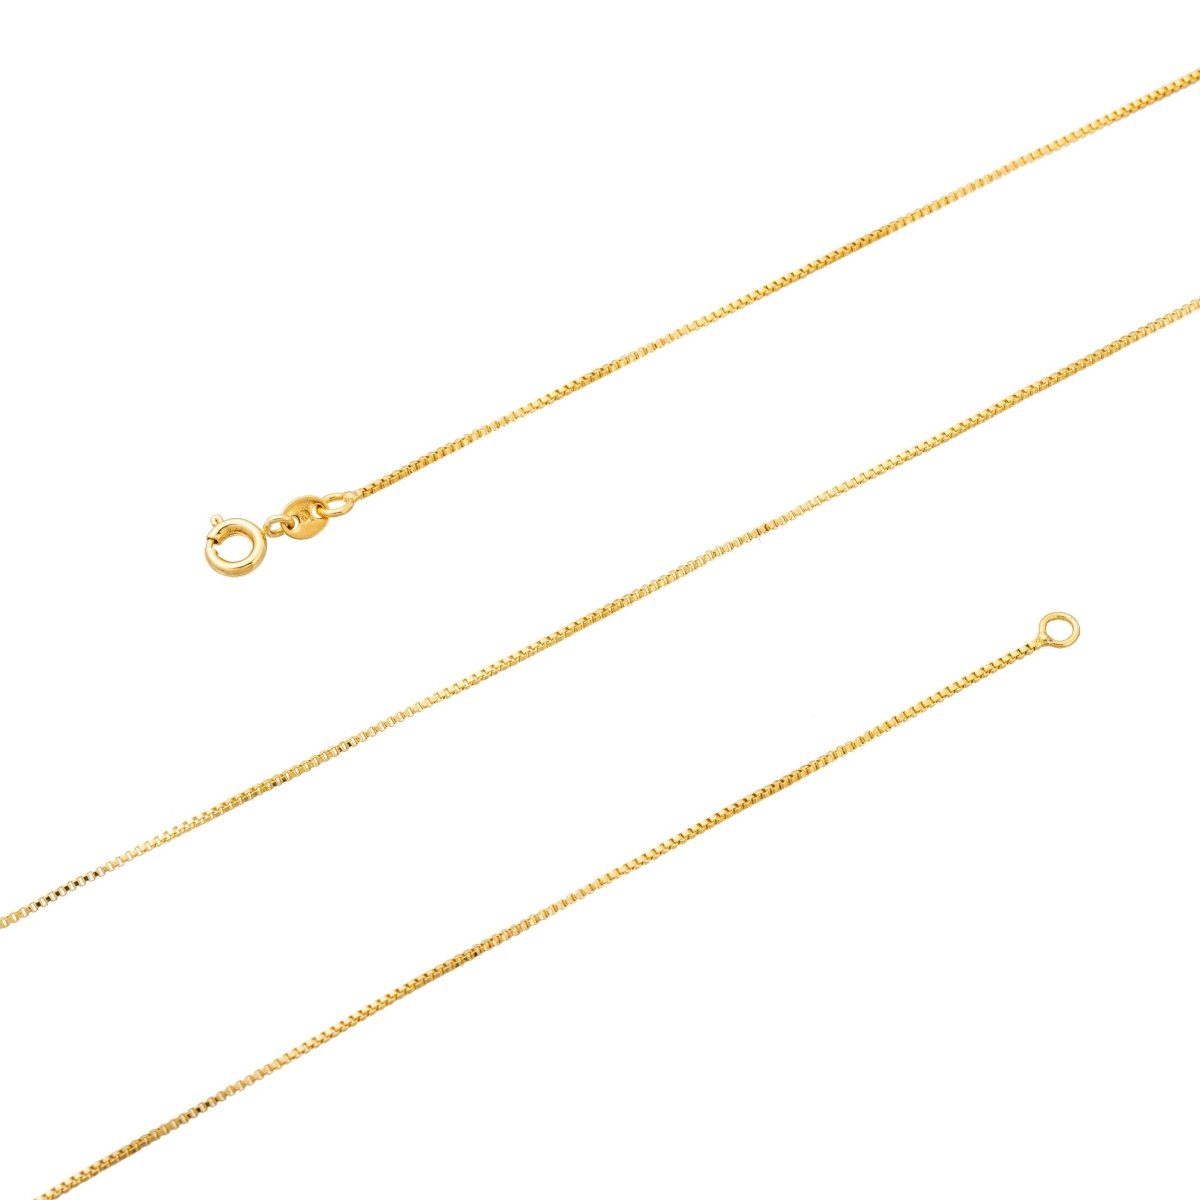 24K Gold Plated Box Chain Necklace, Dainty 1.1 mm Fine Yellow Gold Necklace, Long Finished 23.5 Inches Gold Chain | CN-154 Clearance Pricing - DLUXCA